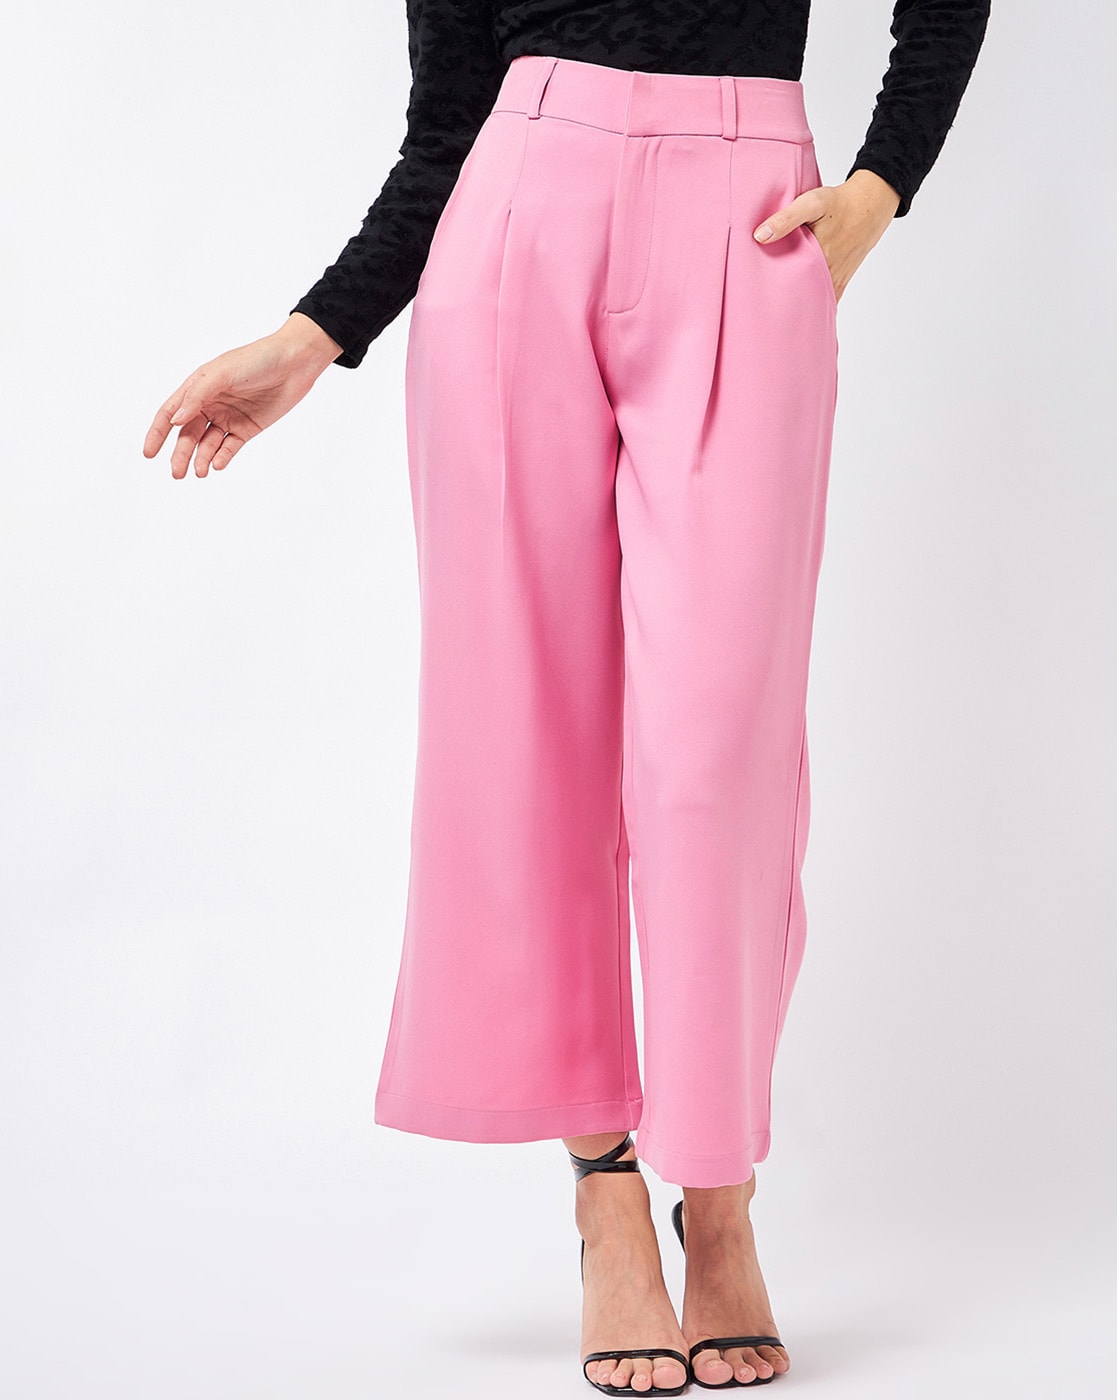 River Island Womens Pink Lyocell Straight Trousers Size 10 | eBay